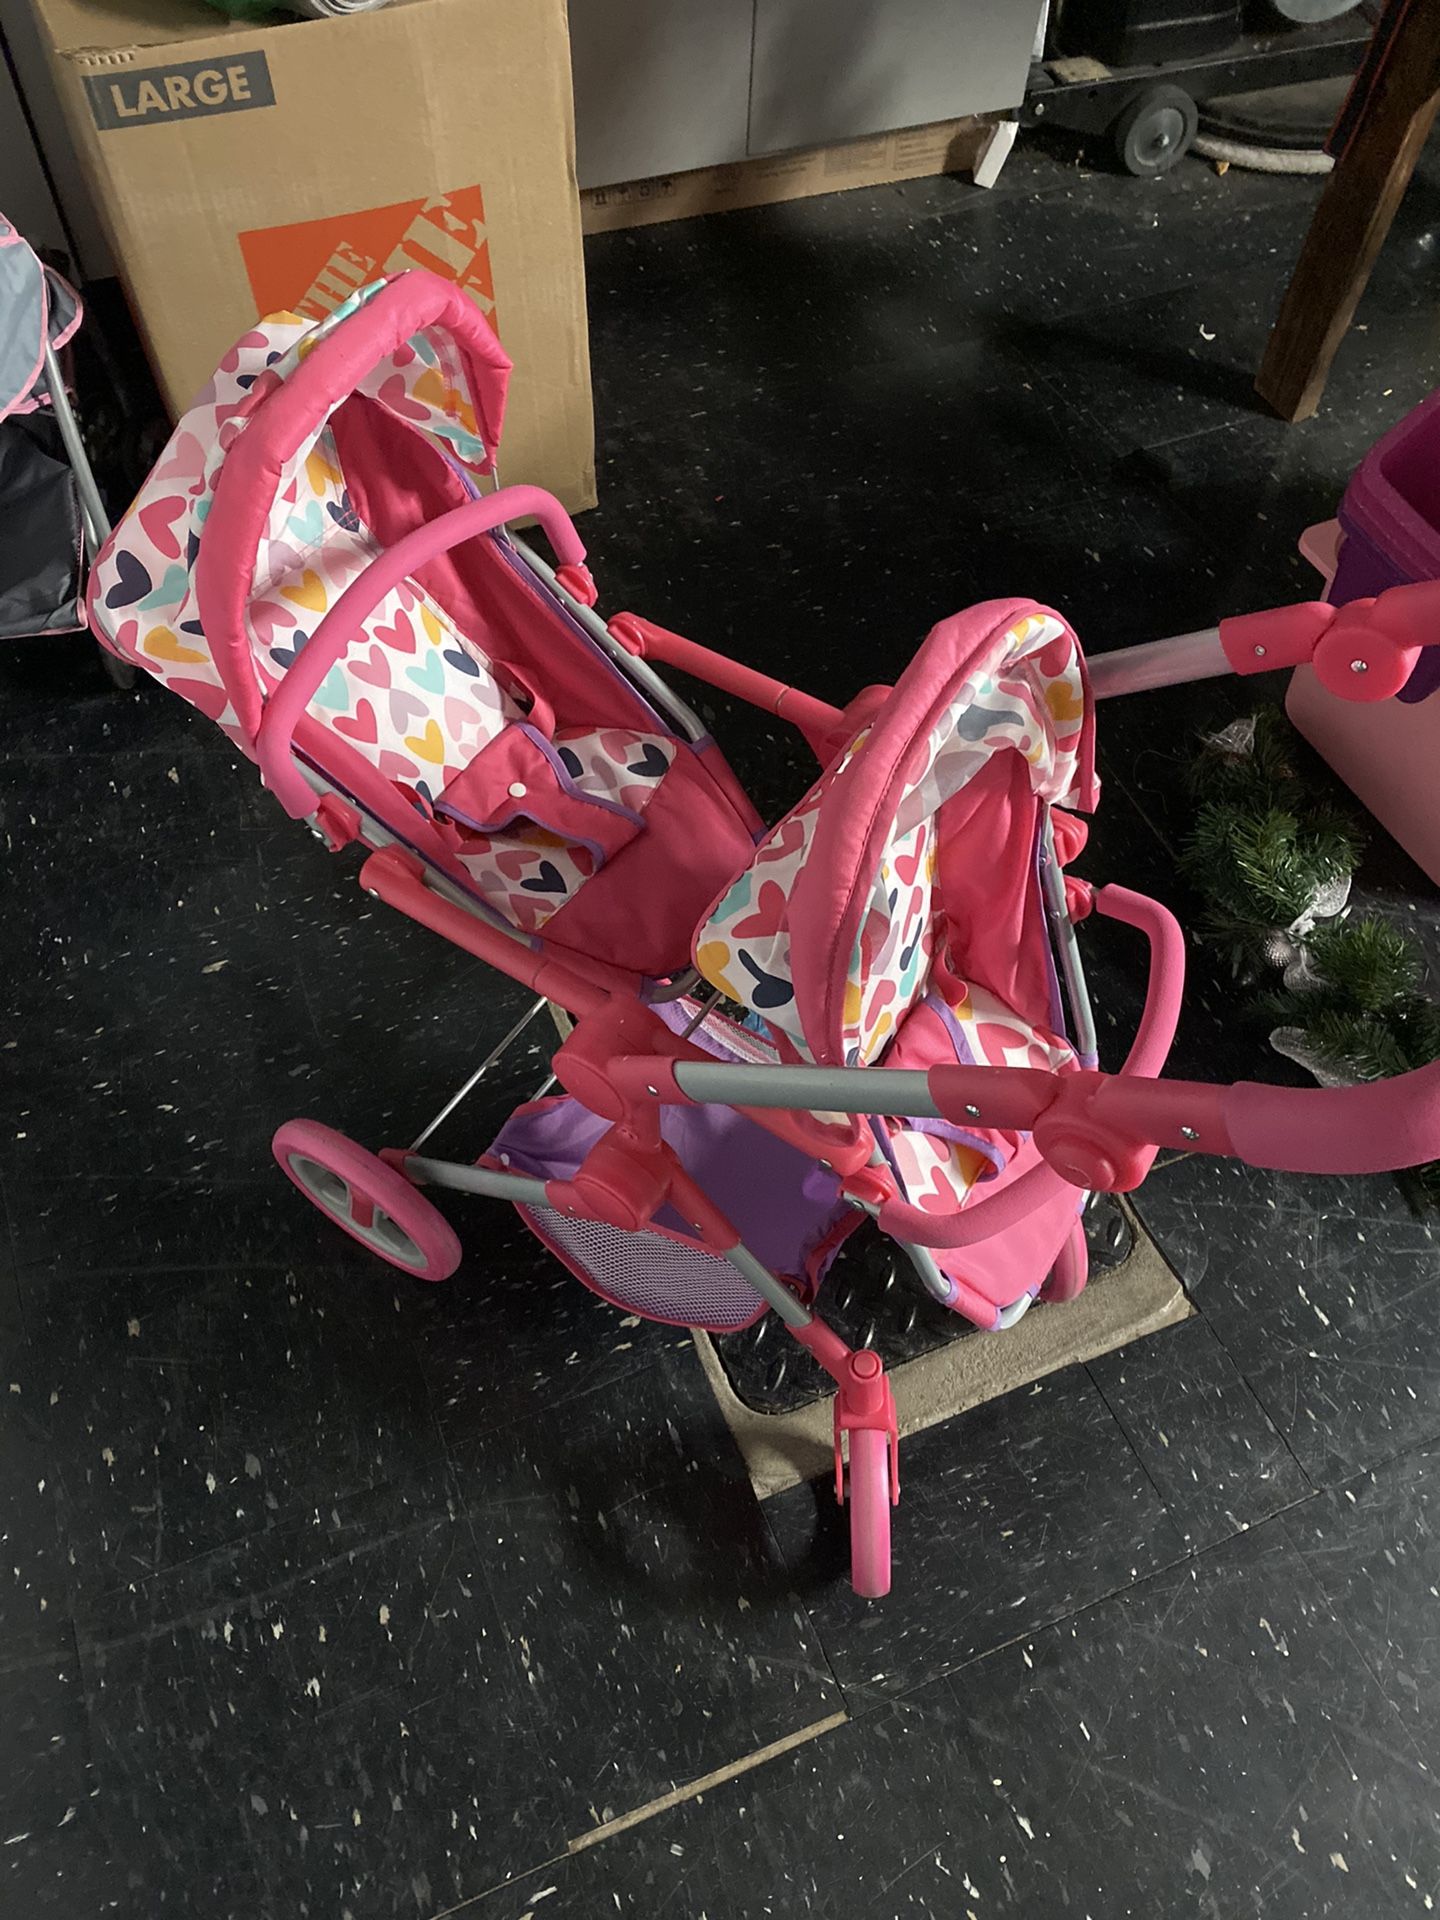 Baby DOLL strollers